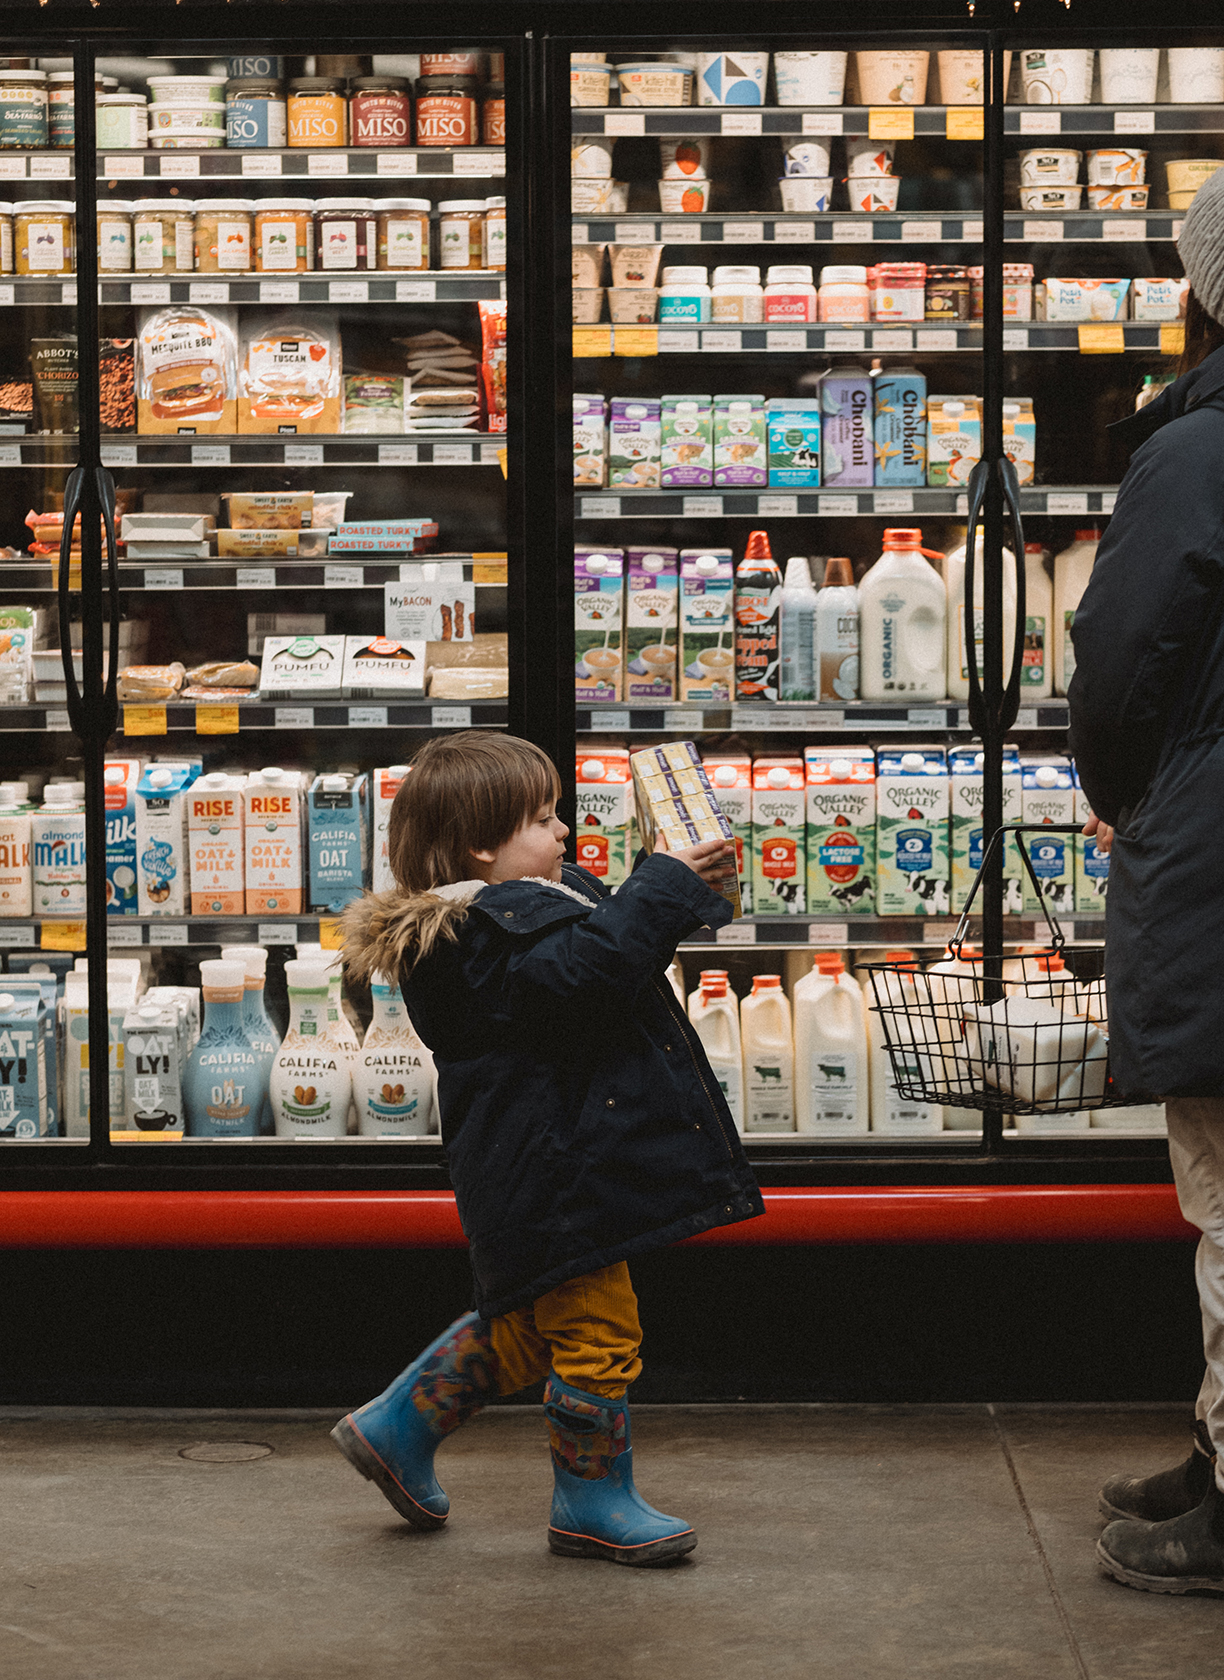 focus on a child trailing behind their mother in front of the dairy case holding a package of yogurt